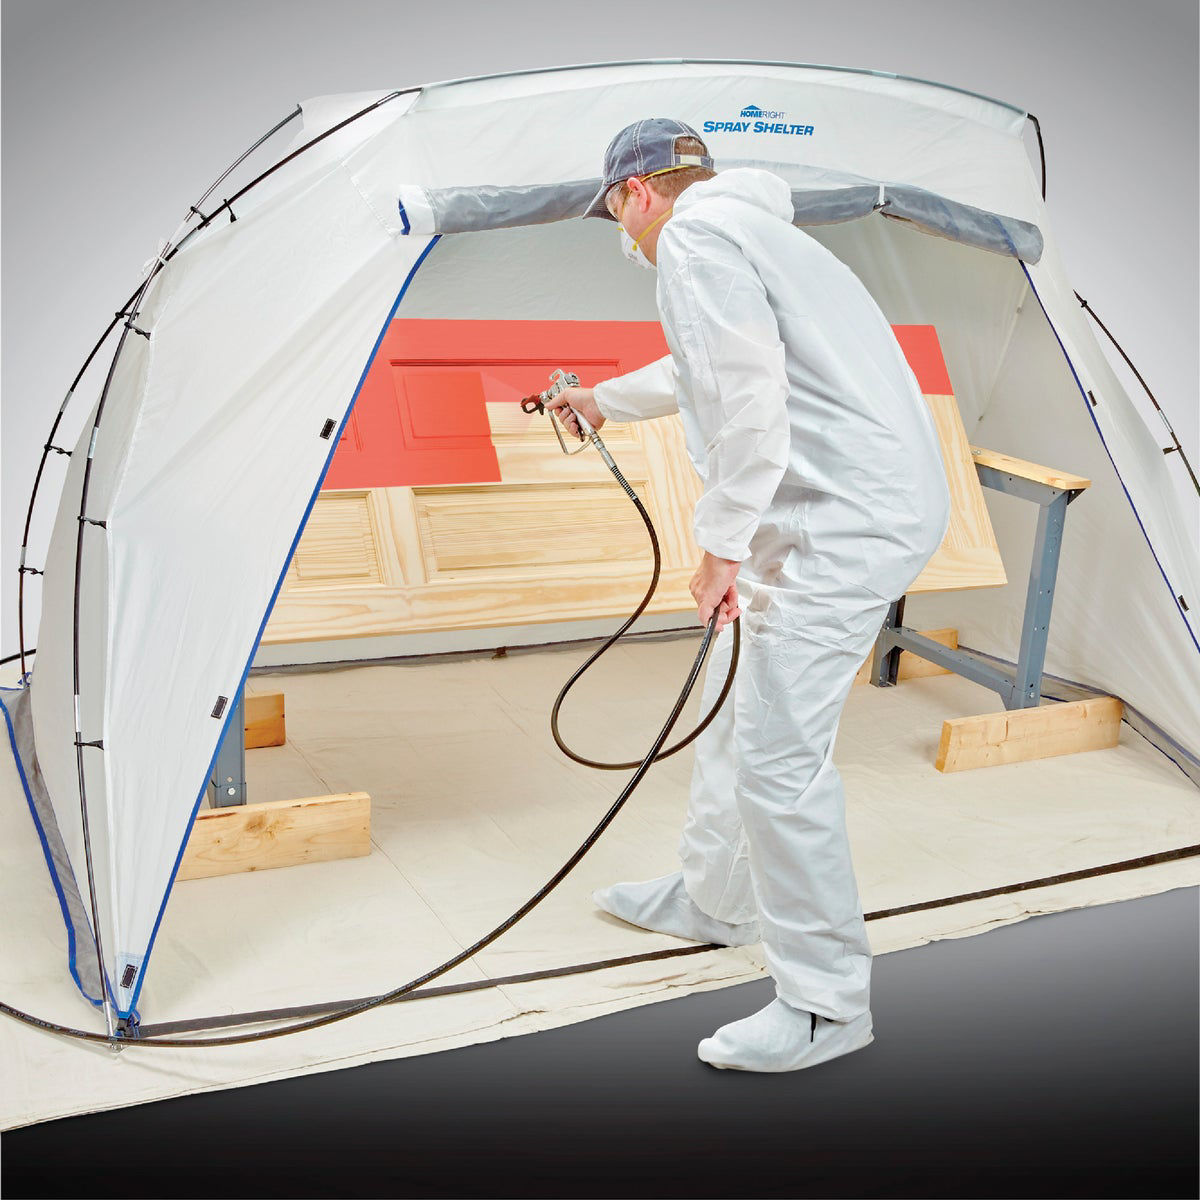 Wagner 9 Ft. W x 5.5 Ft. H x 6 Ft. D Large Portable Spray Shelter